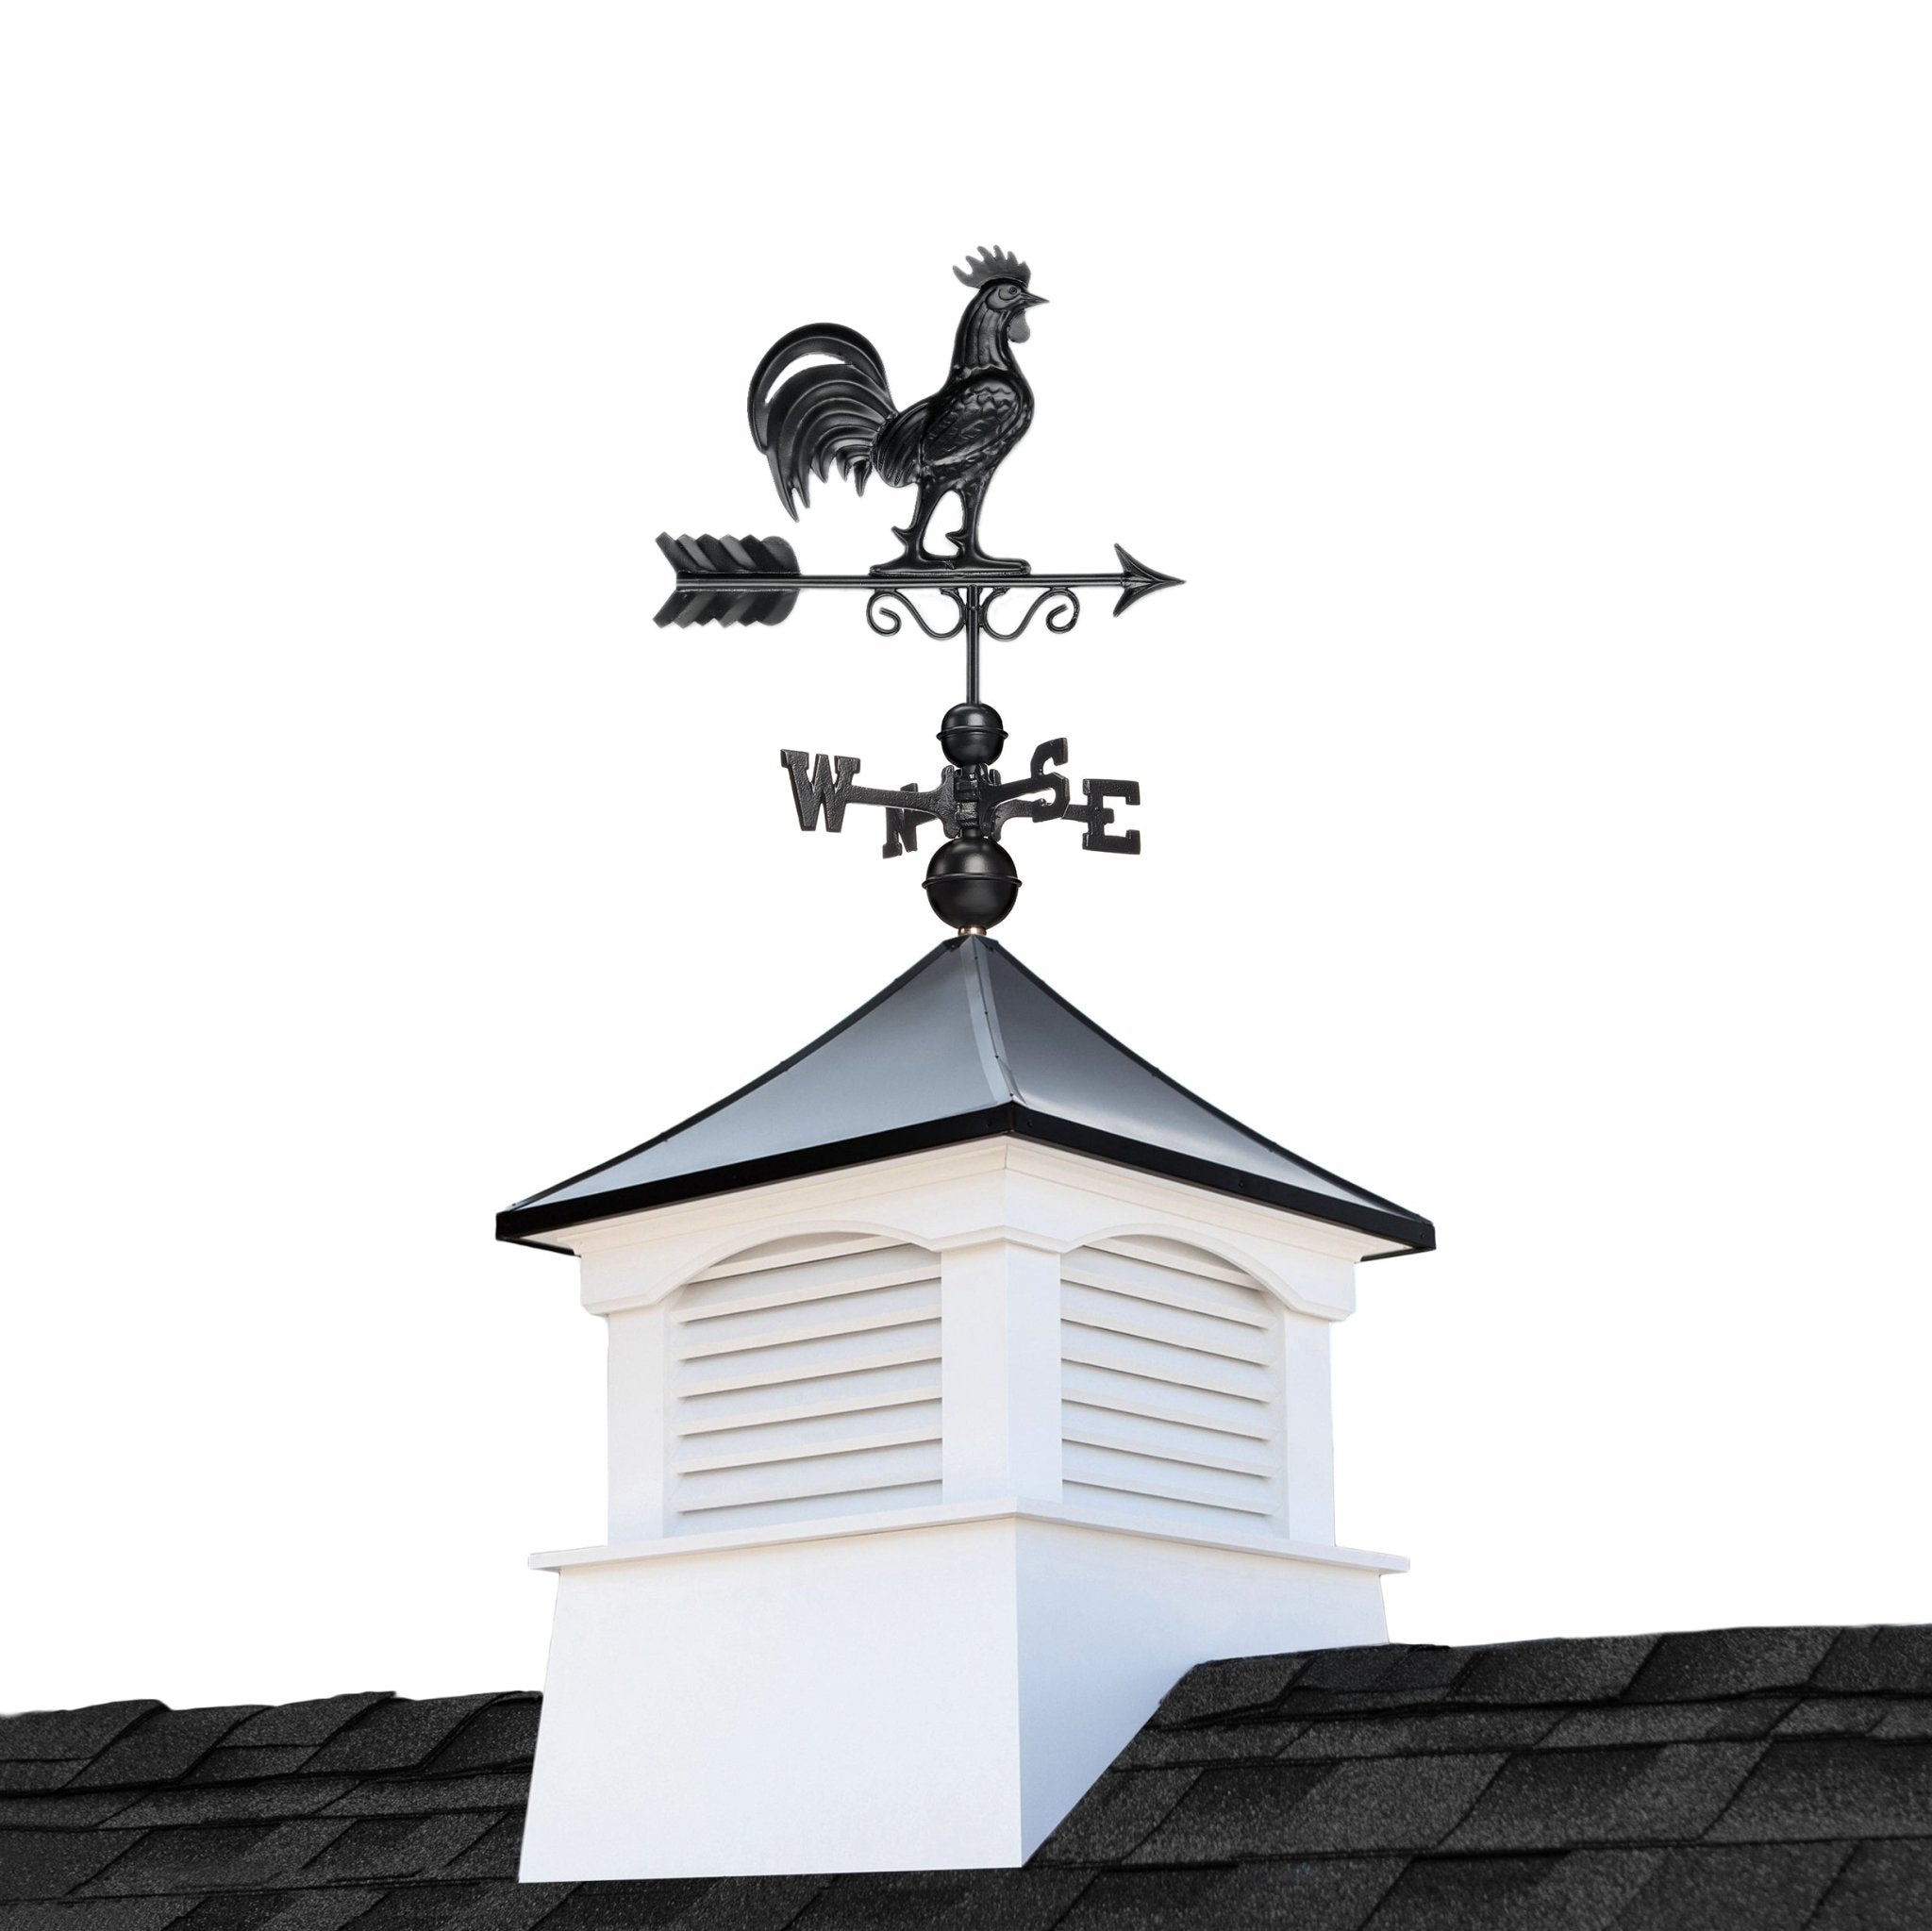 26" Square Coventry Vinyl Cupola with Black Aluminum roof and Black Aluminum Rooster Weathervane by Good Directions - Good Directions